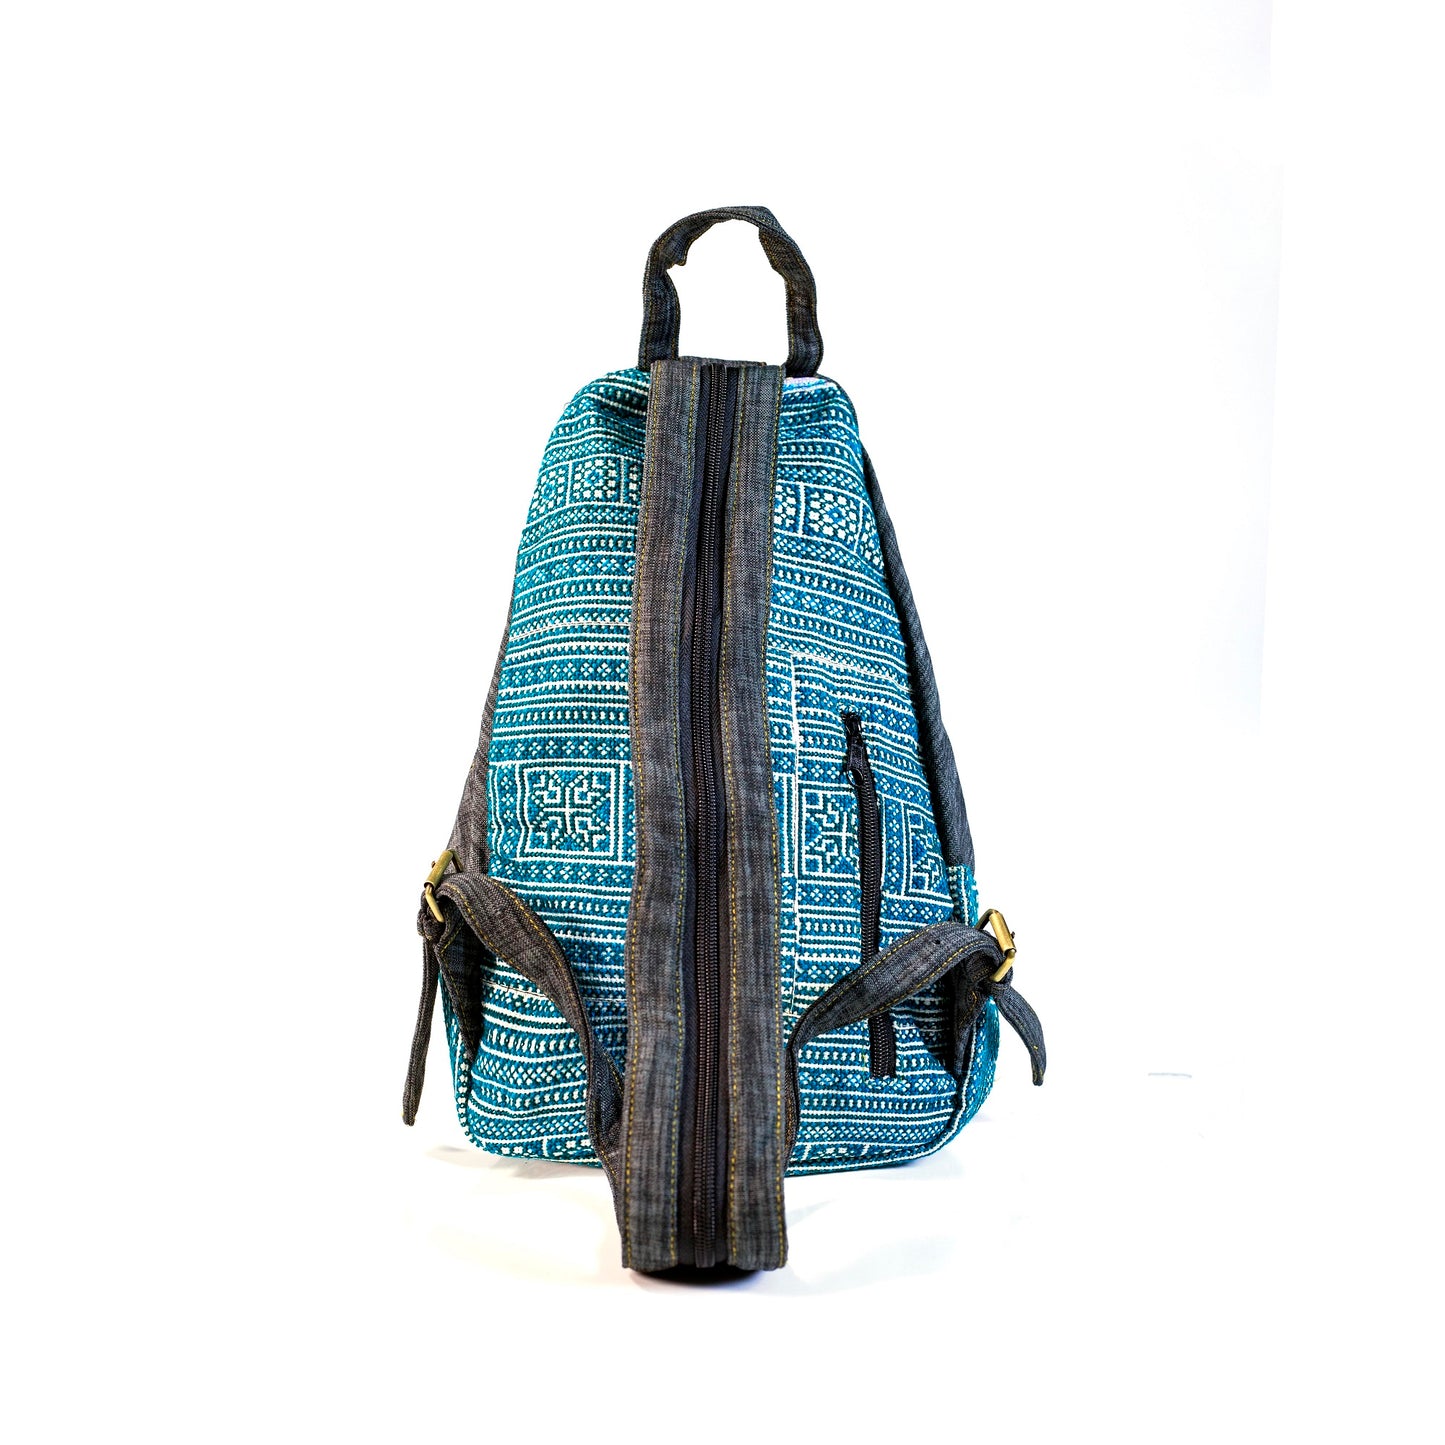 Multi-purpose backpack and sling, light blue hand-embroidery fabric, dark blue trim